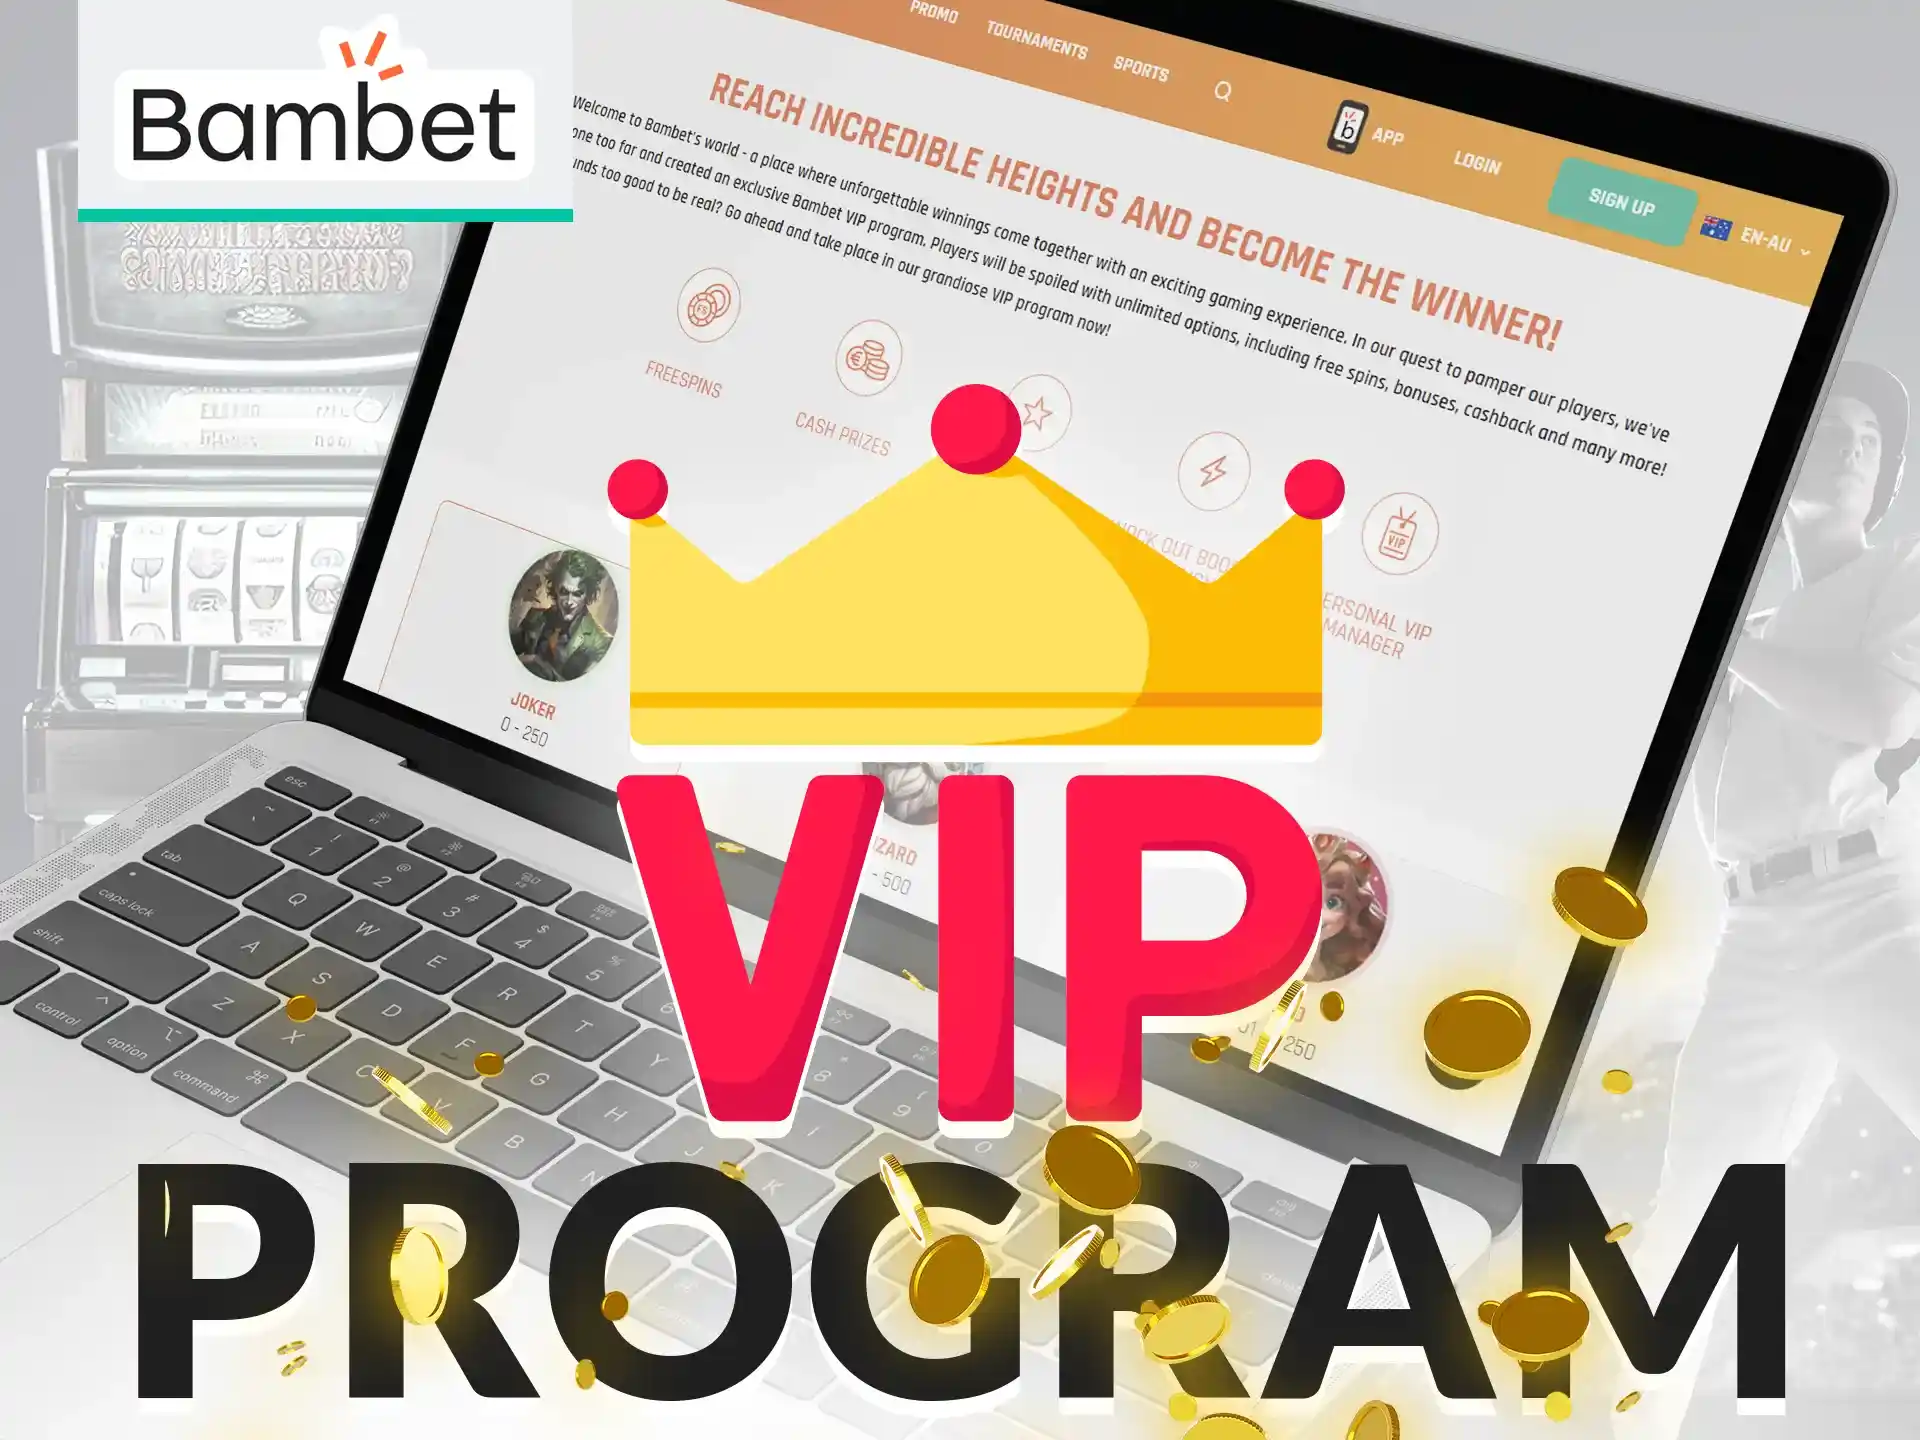 Bambet's VIP program allows players to access a number of elite benefits and personalized bonuses.